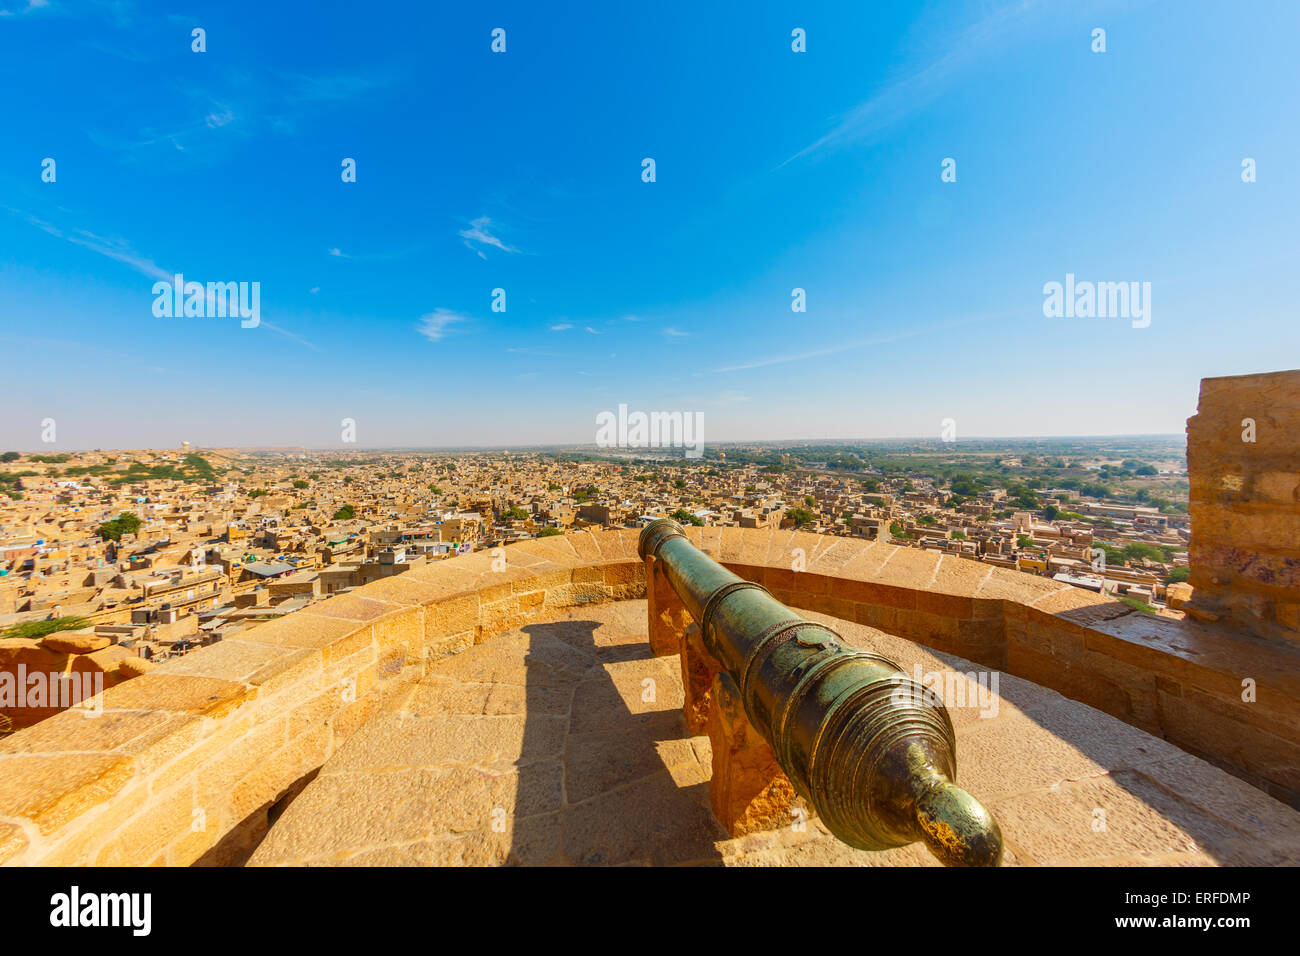 Ancient cannon in Jaisalmer fort, Rajasthan, India Stock Photo